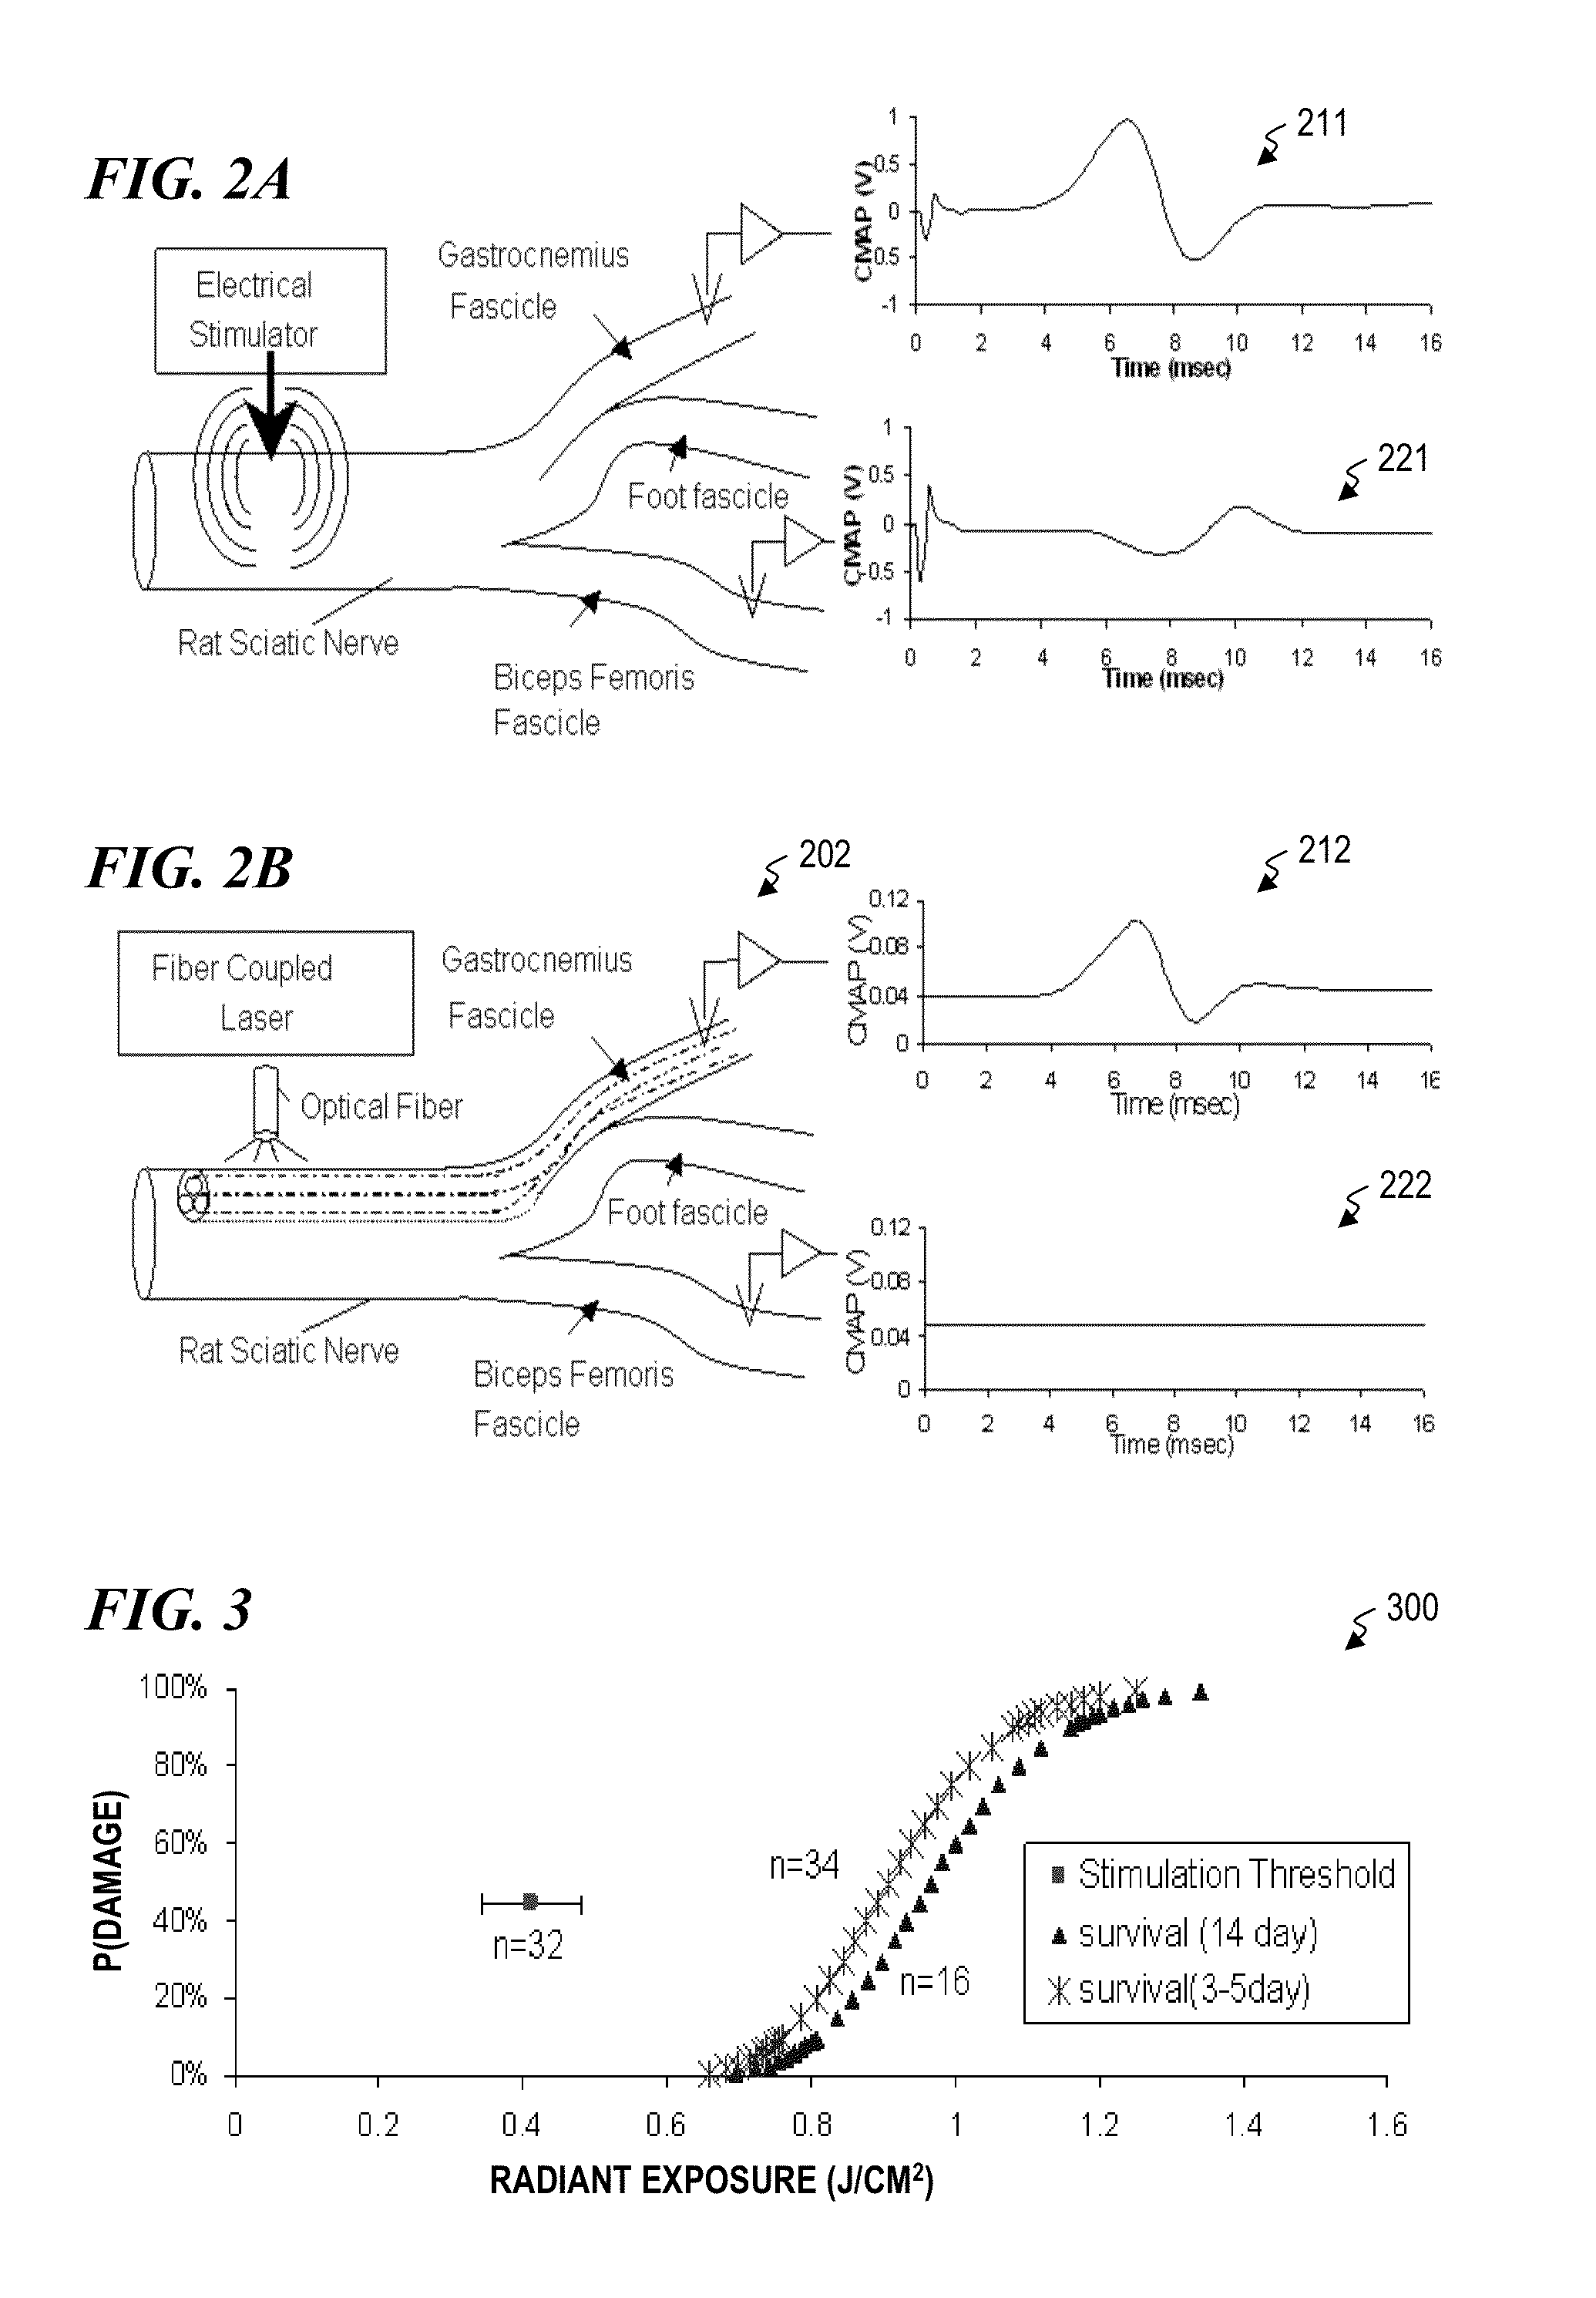 Method and nerve stimulator using simultaneous electrical and optical signals